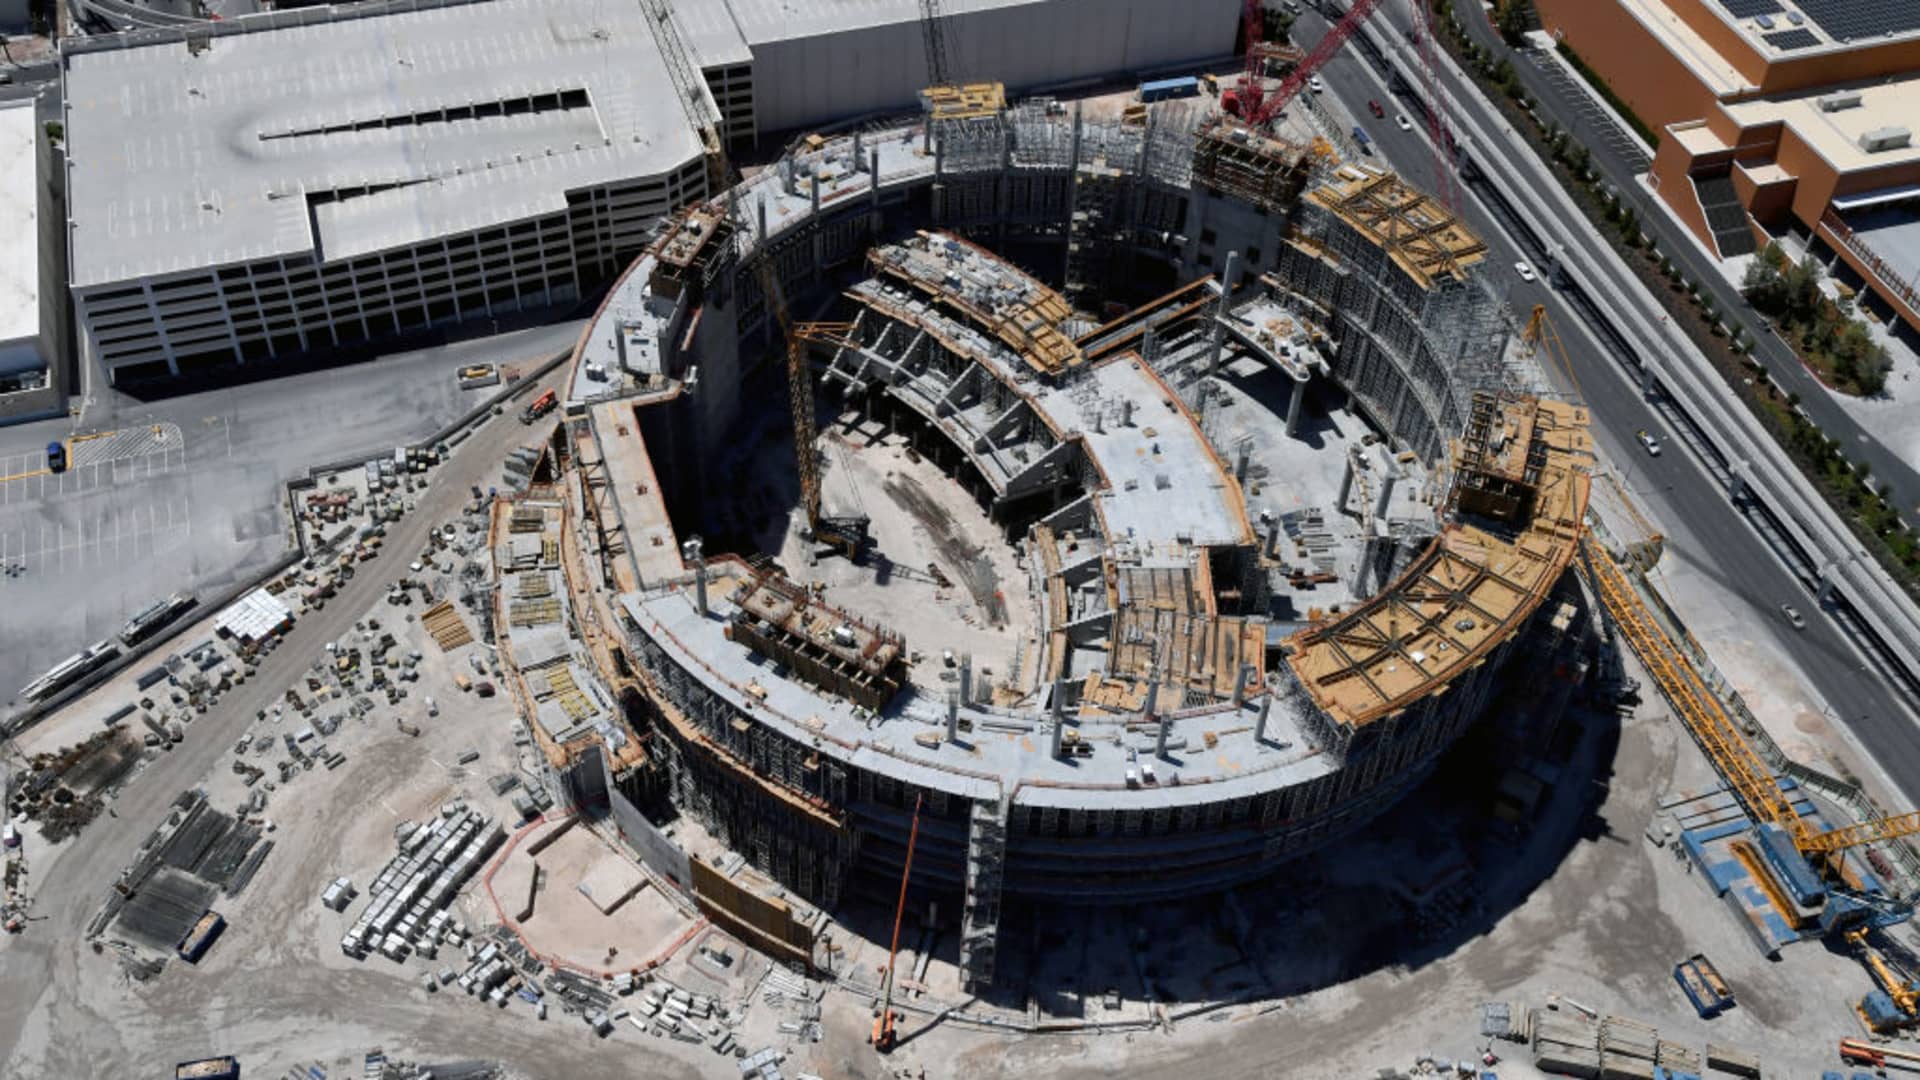 An aerial view shows the USD 1.66 billion MSG Sphere at The Venetian, where construction work is stopped due to the coronavirus (COVID-19) pandemic on May 21, 2020 in Las Vegas, Nevada.